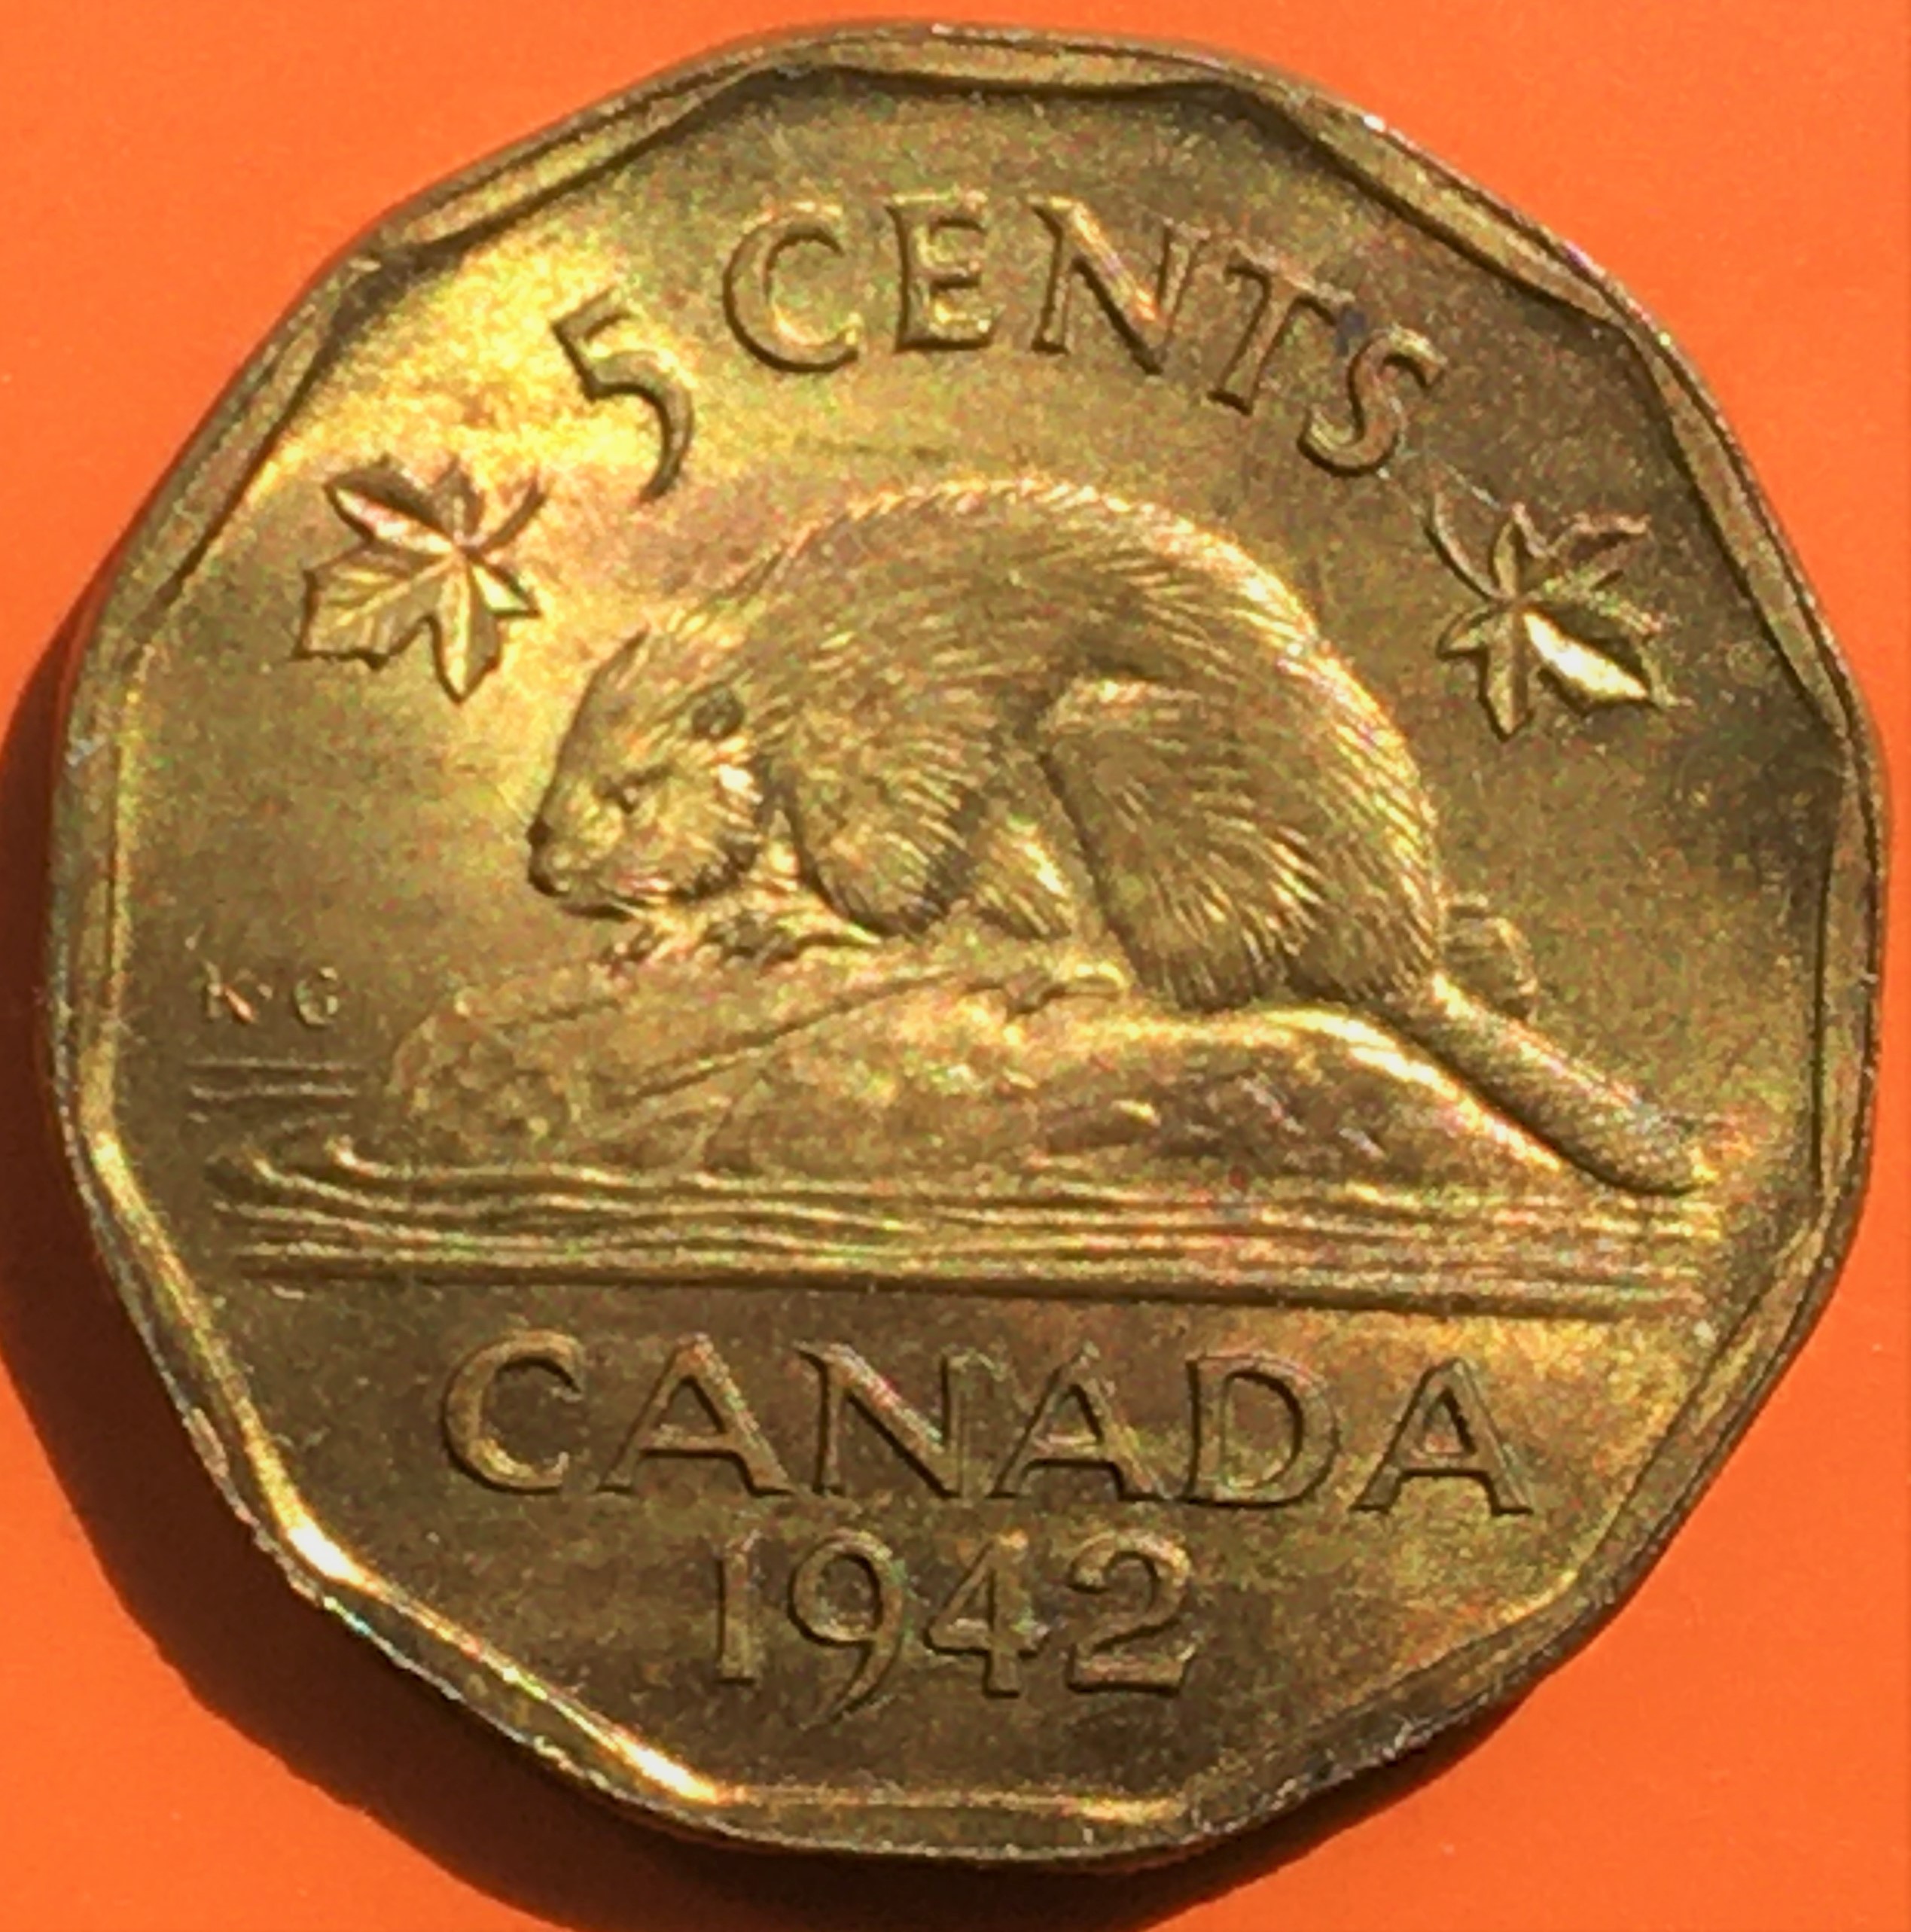 5 cents 1942 tombac revers.jpg